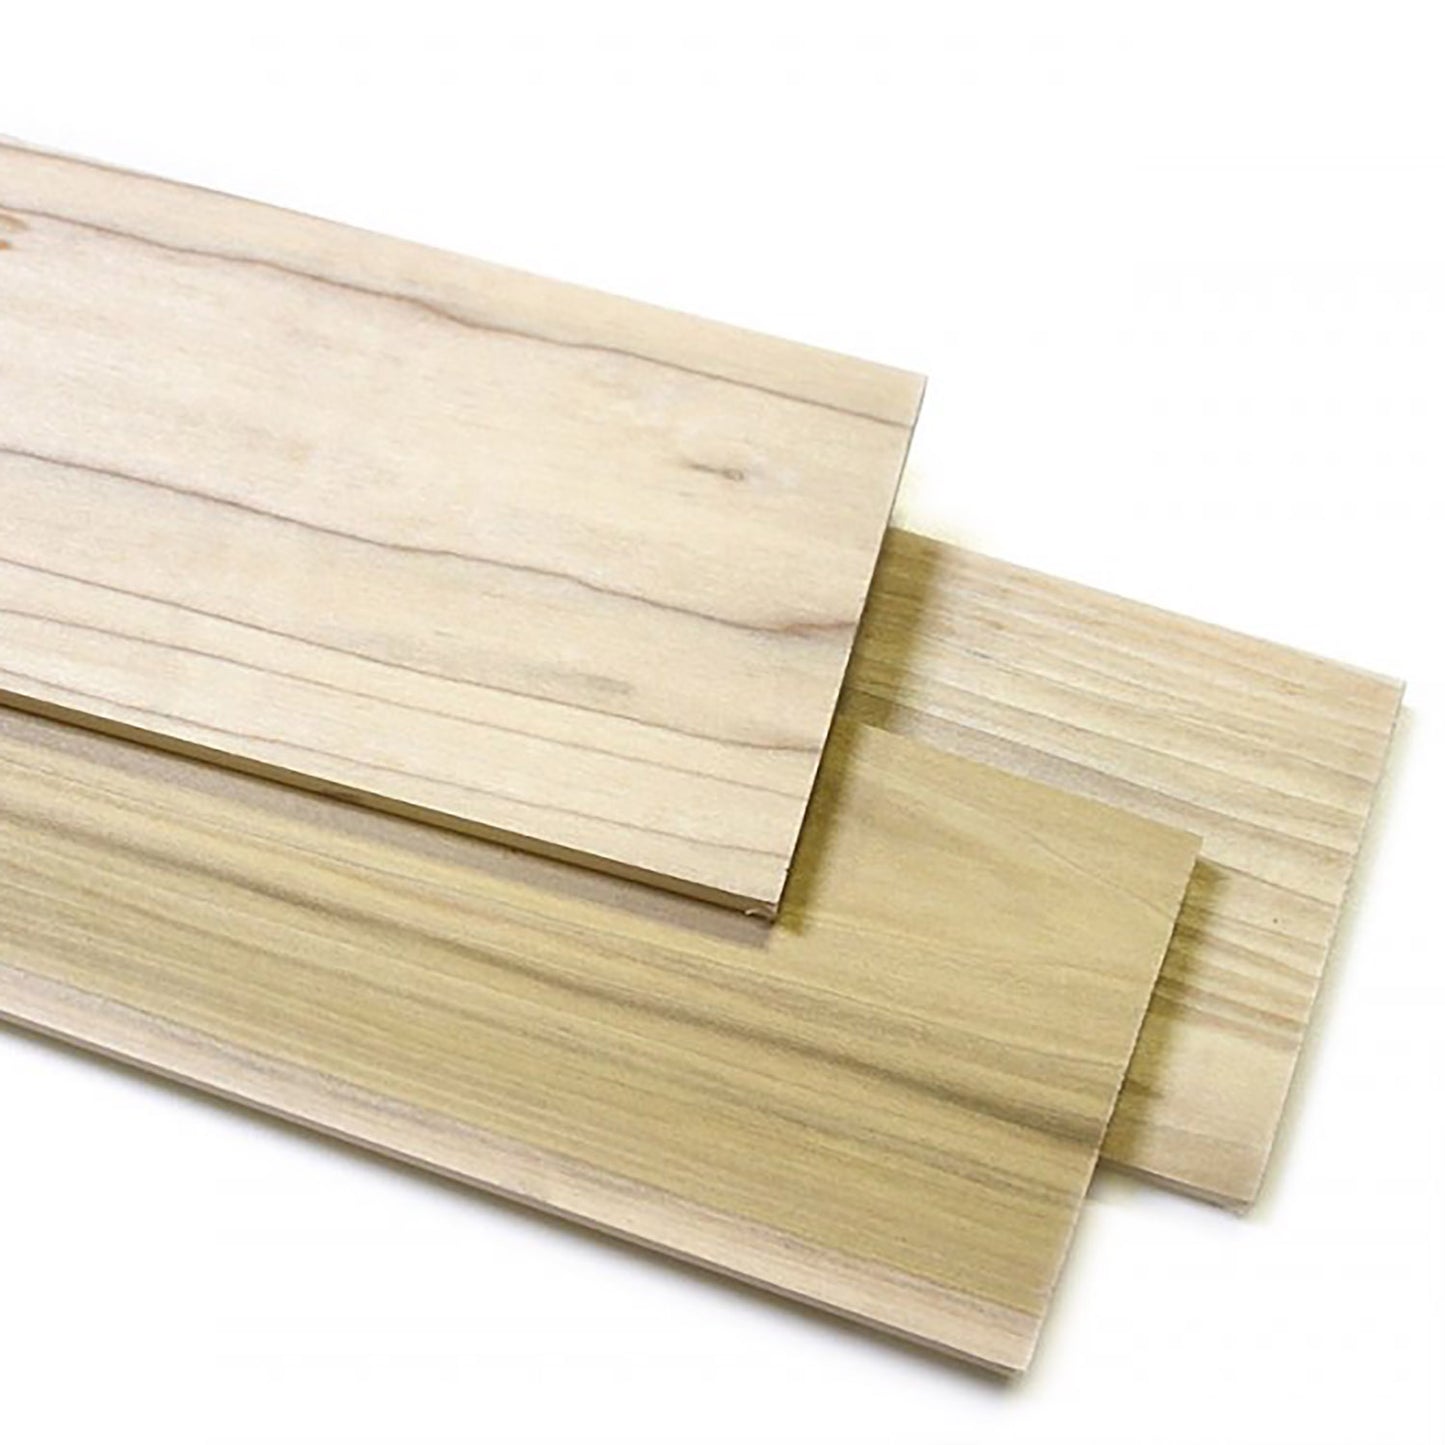 Unfinished Select Poplar Board Smooth on 4 Sides (3 pack)